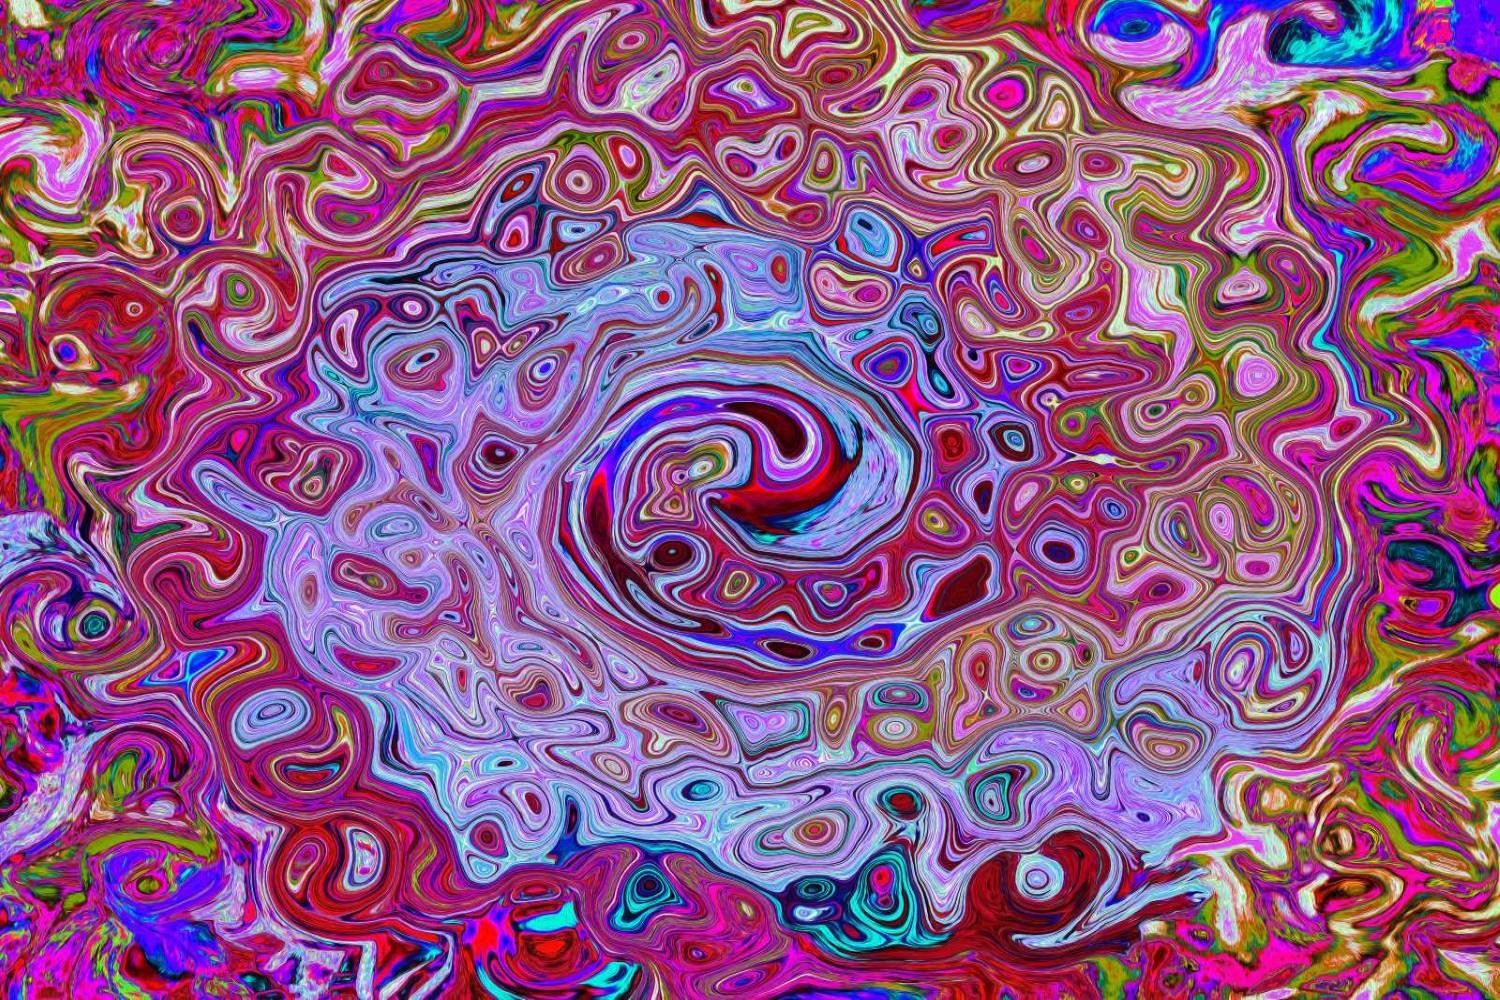 Retro Groovy Abstract Lavender and Magenta Swirl